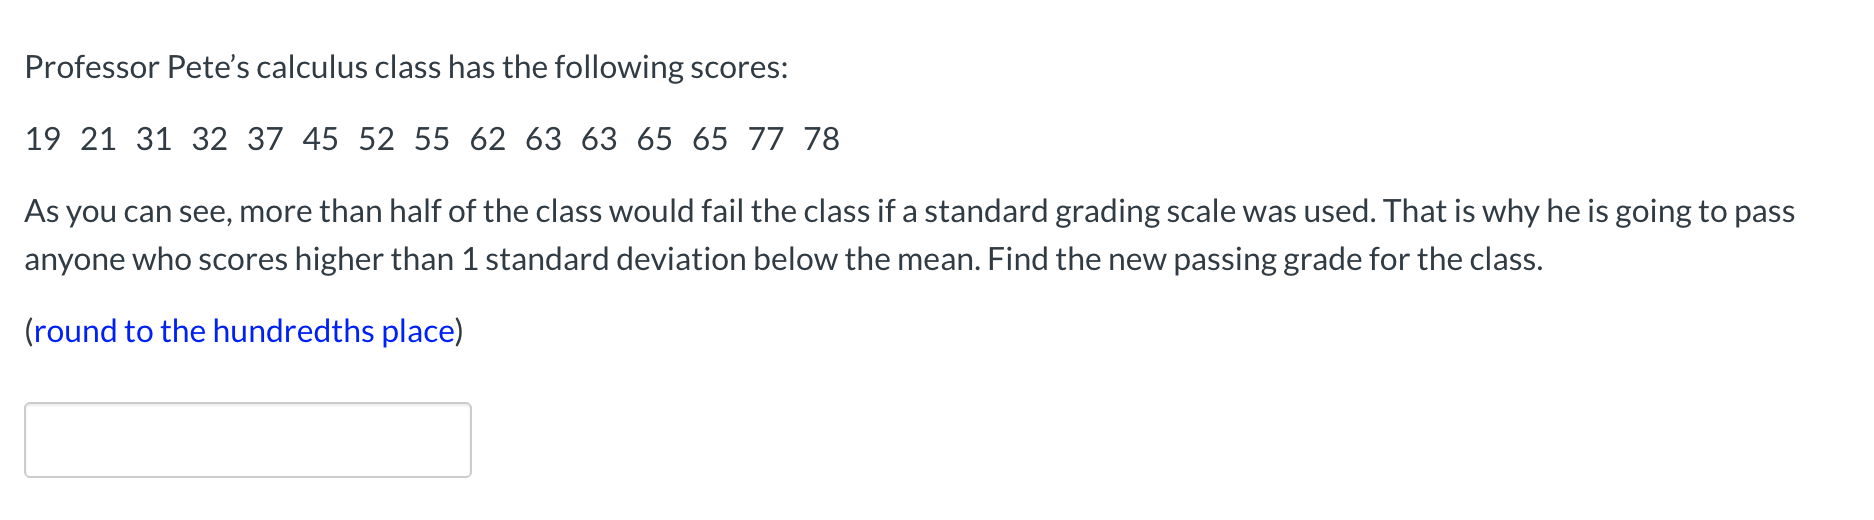 Professor Pete's calculus class has the following scores:
19 21 31 32 37 45 52 55 62 63 63 65 65 77 78
As you can see, more than half of the class would fail the class if a standard grading scale was used. That is why he is going to pass
anyone who scores higher than 1 standard deviation below the mean. Find the new passing grade for the class.
(round to the hundredths place)
